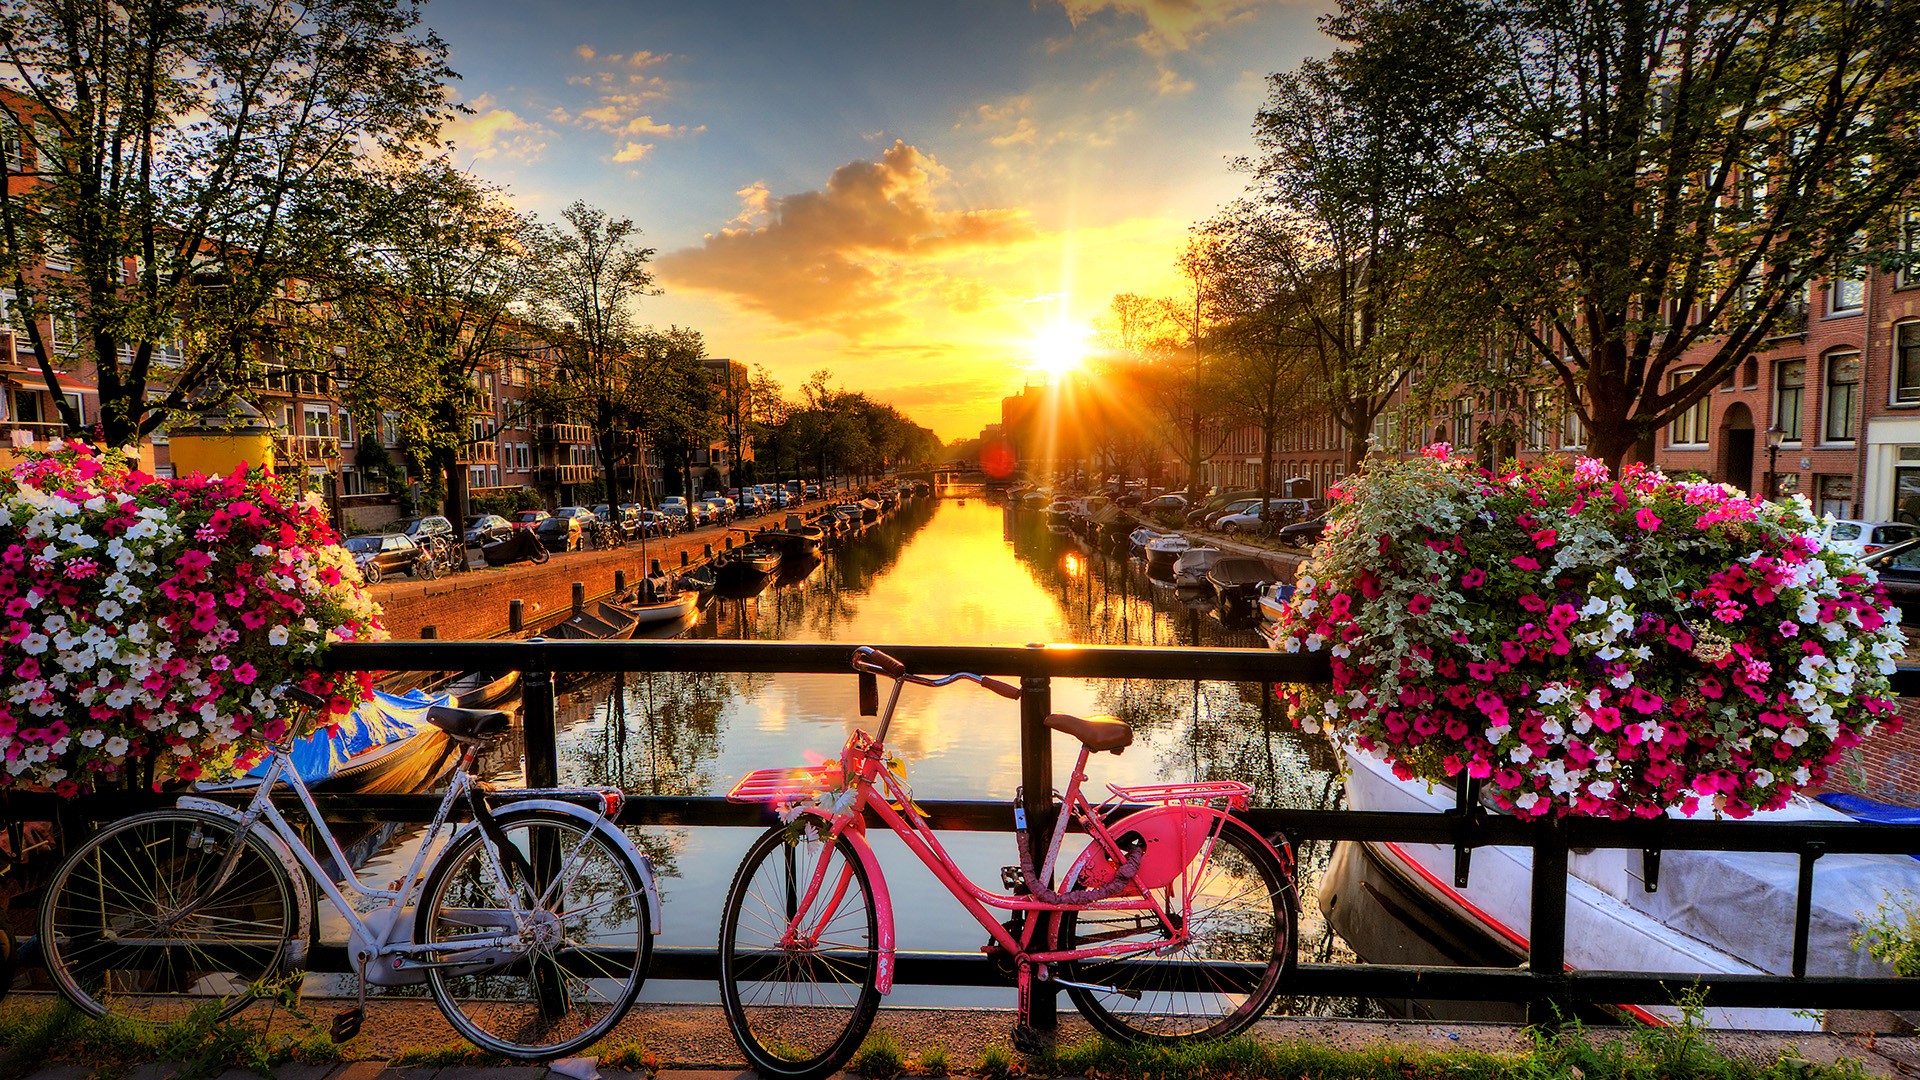 Sunrise over canal with flowers and bicycles on the bridge in spring